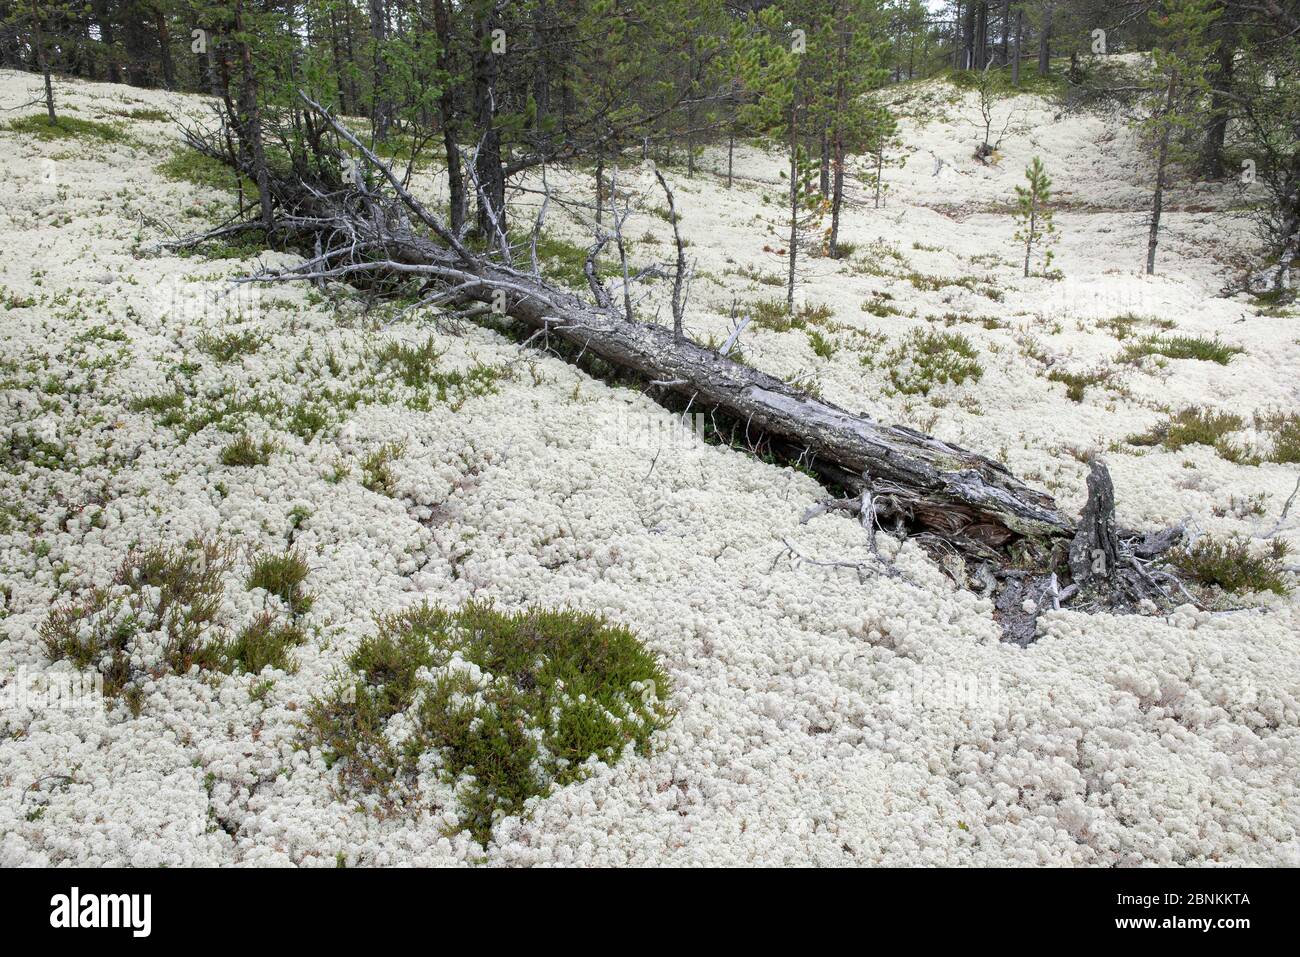 Iceland moss (Cetraria islandica) in flower, Rondane, Norway July Stock Photo